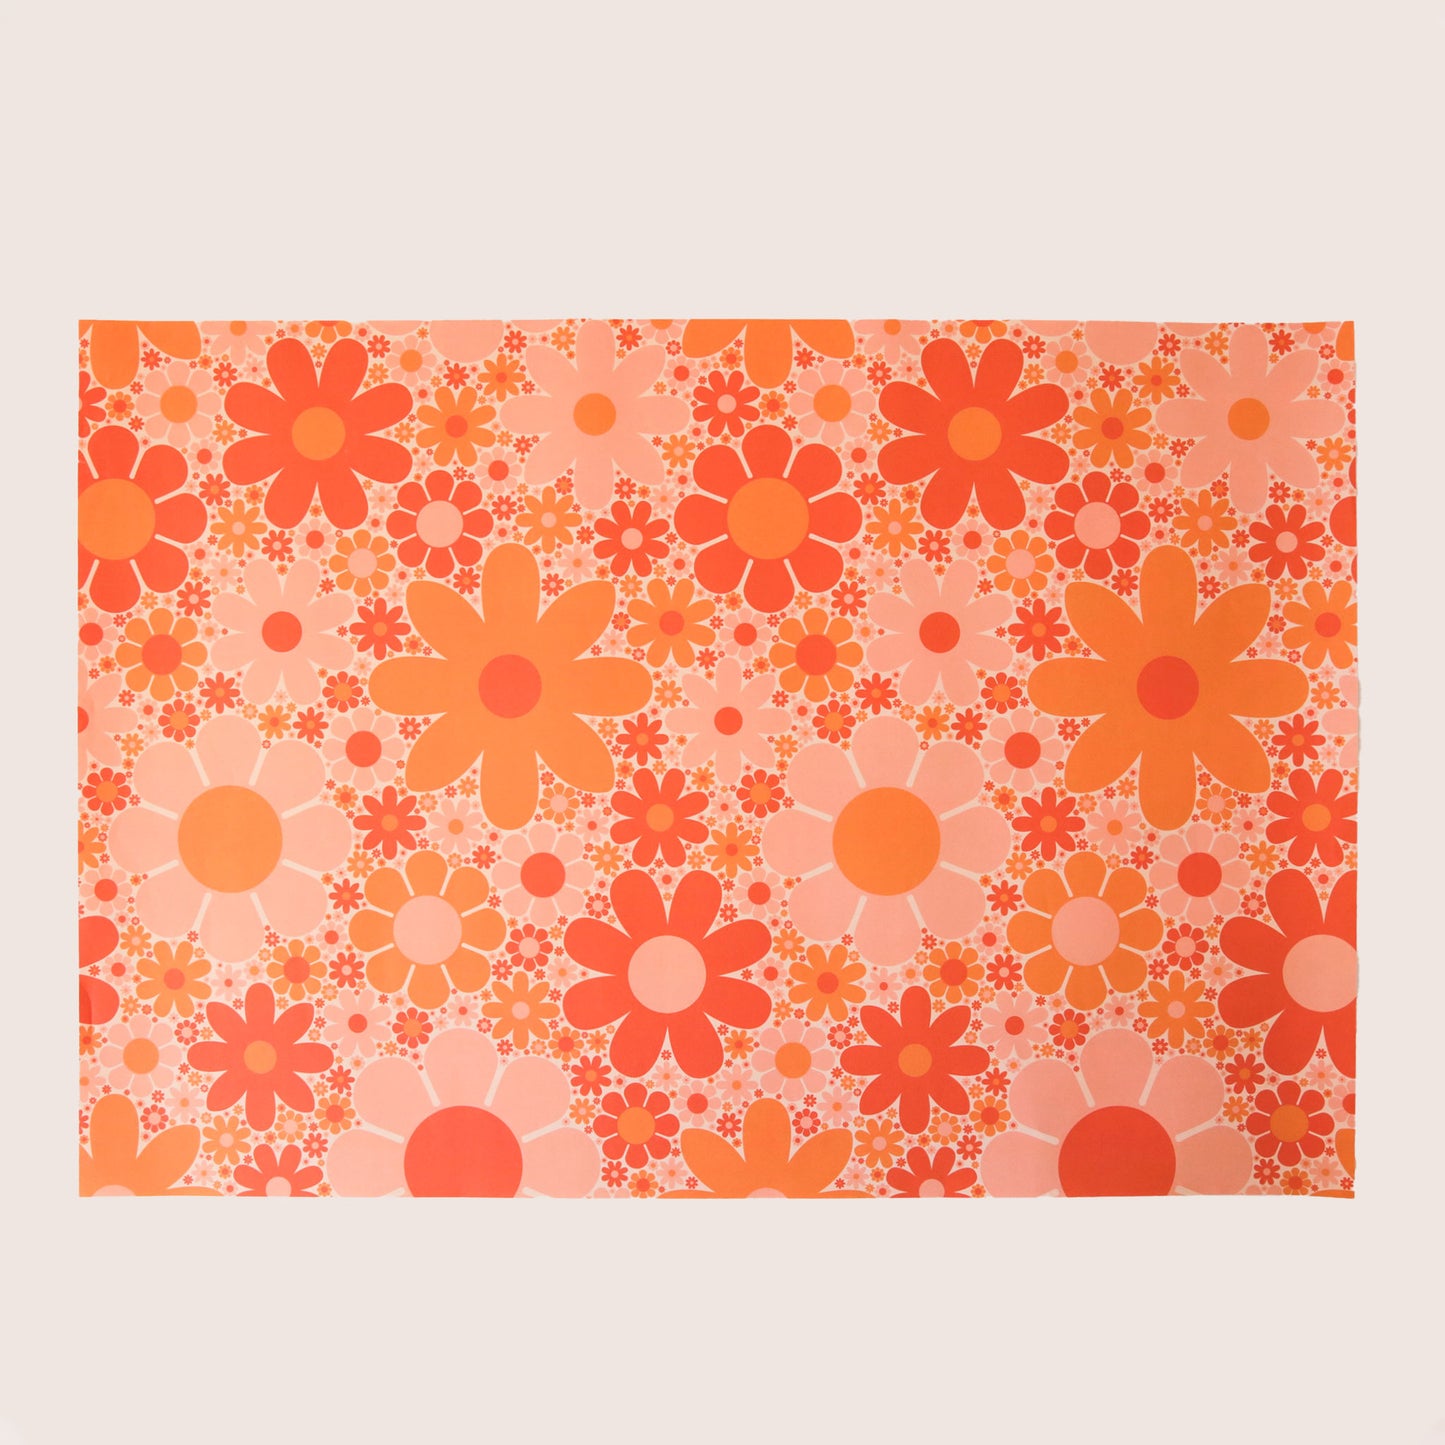 Sheet of wrapping paper filled with orange and pink flowers of various shapes and sizes.